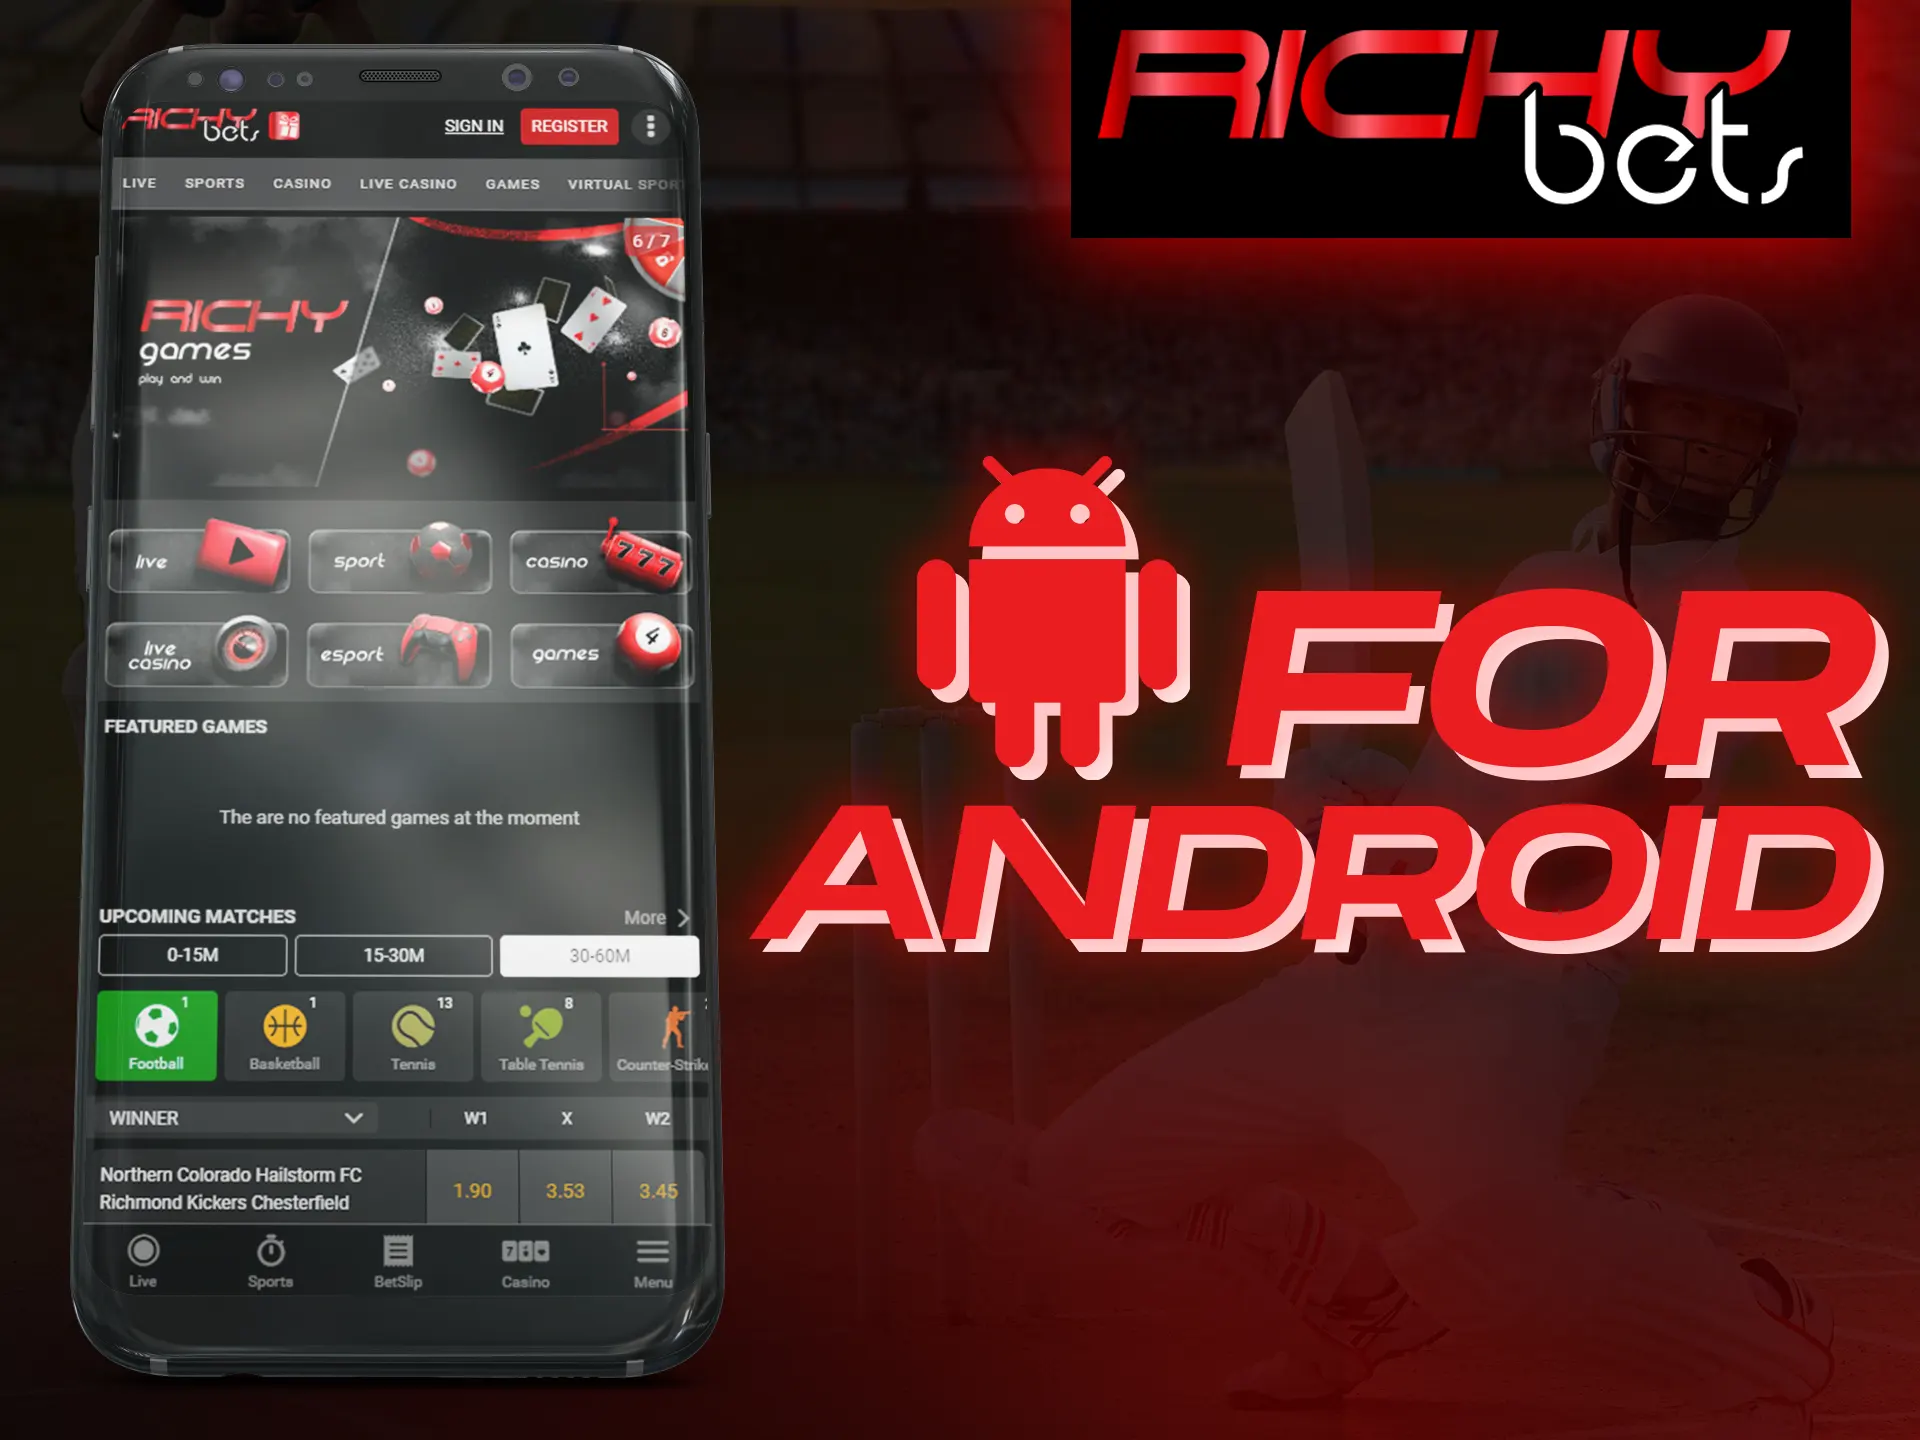 Install the Richybets app on your Android phone.